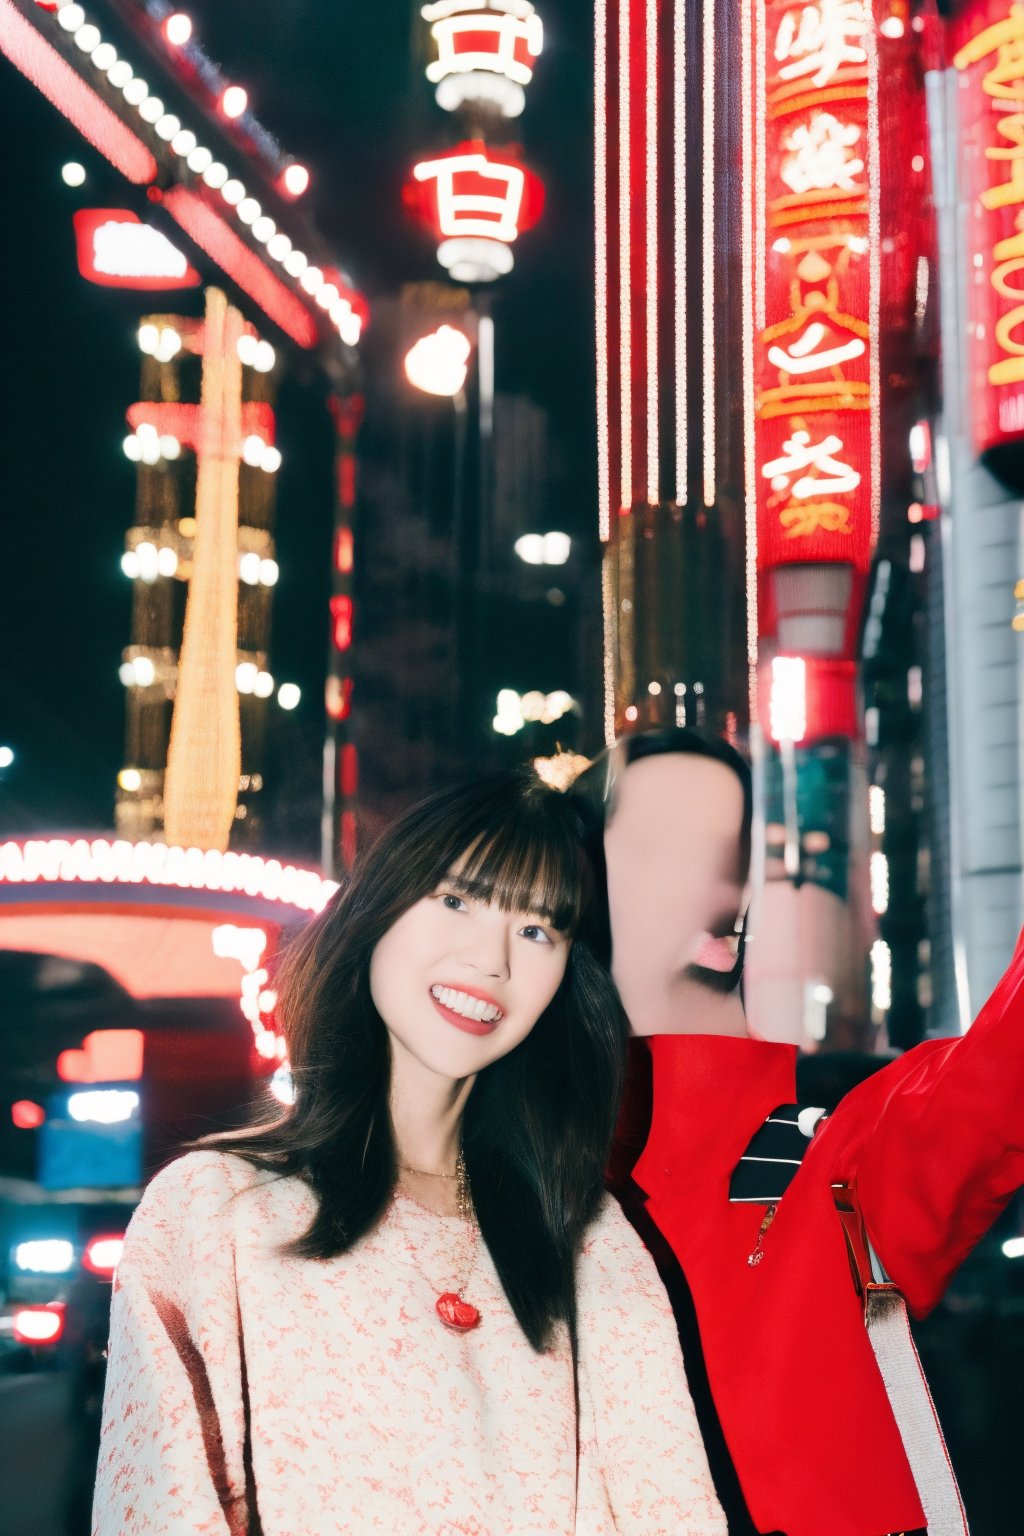 A young Asian woman, short hair, wearing a red jacket and a white t-shirt with Japanese text, necklace, standing on a Tokyo street at night, with Tokyo Tower in the background, illuminated city lights, red lanterns, urban style, night photography, candid pose, low angle shot, with a hint of film grain.

,fujifilm